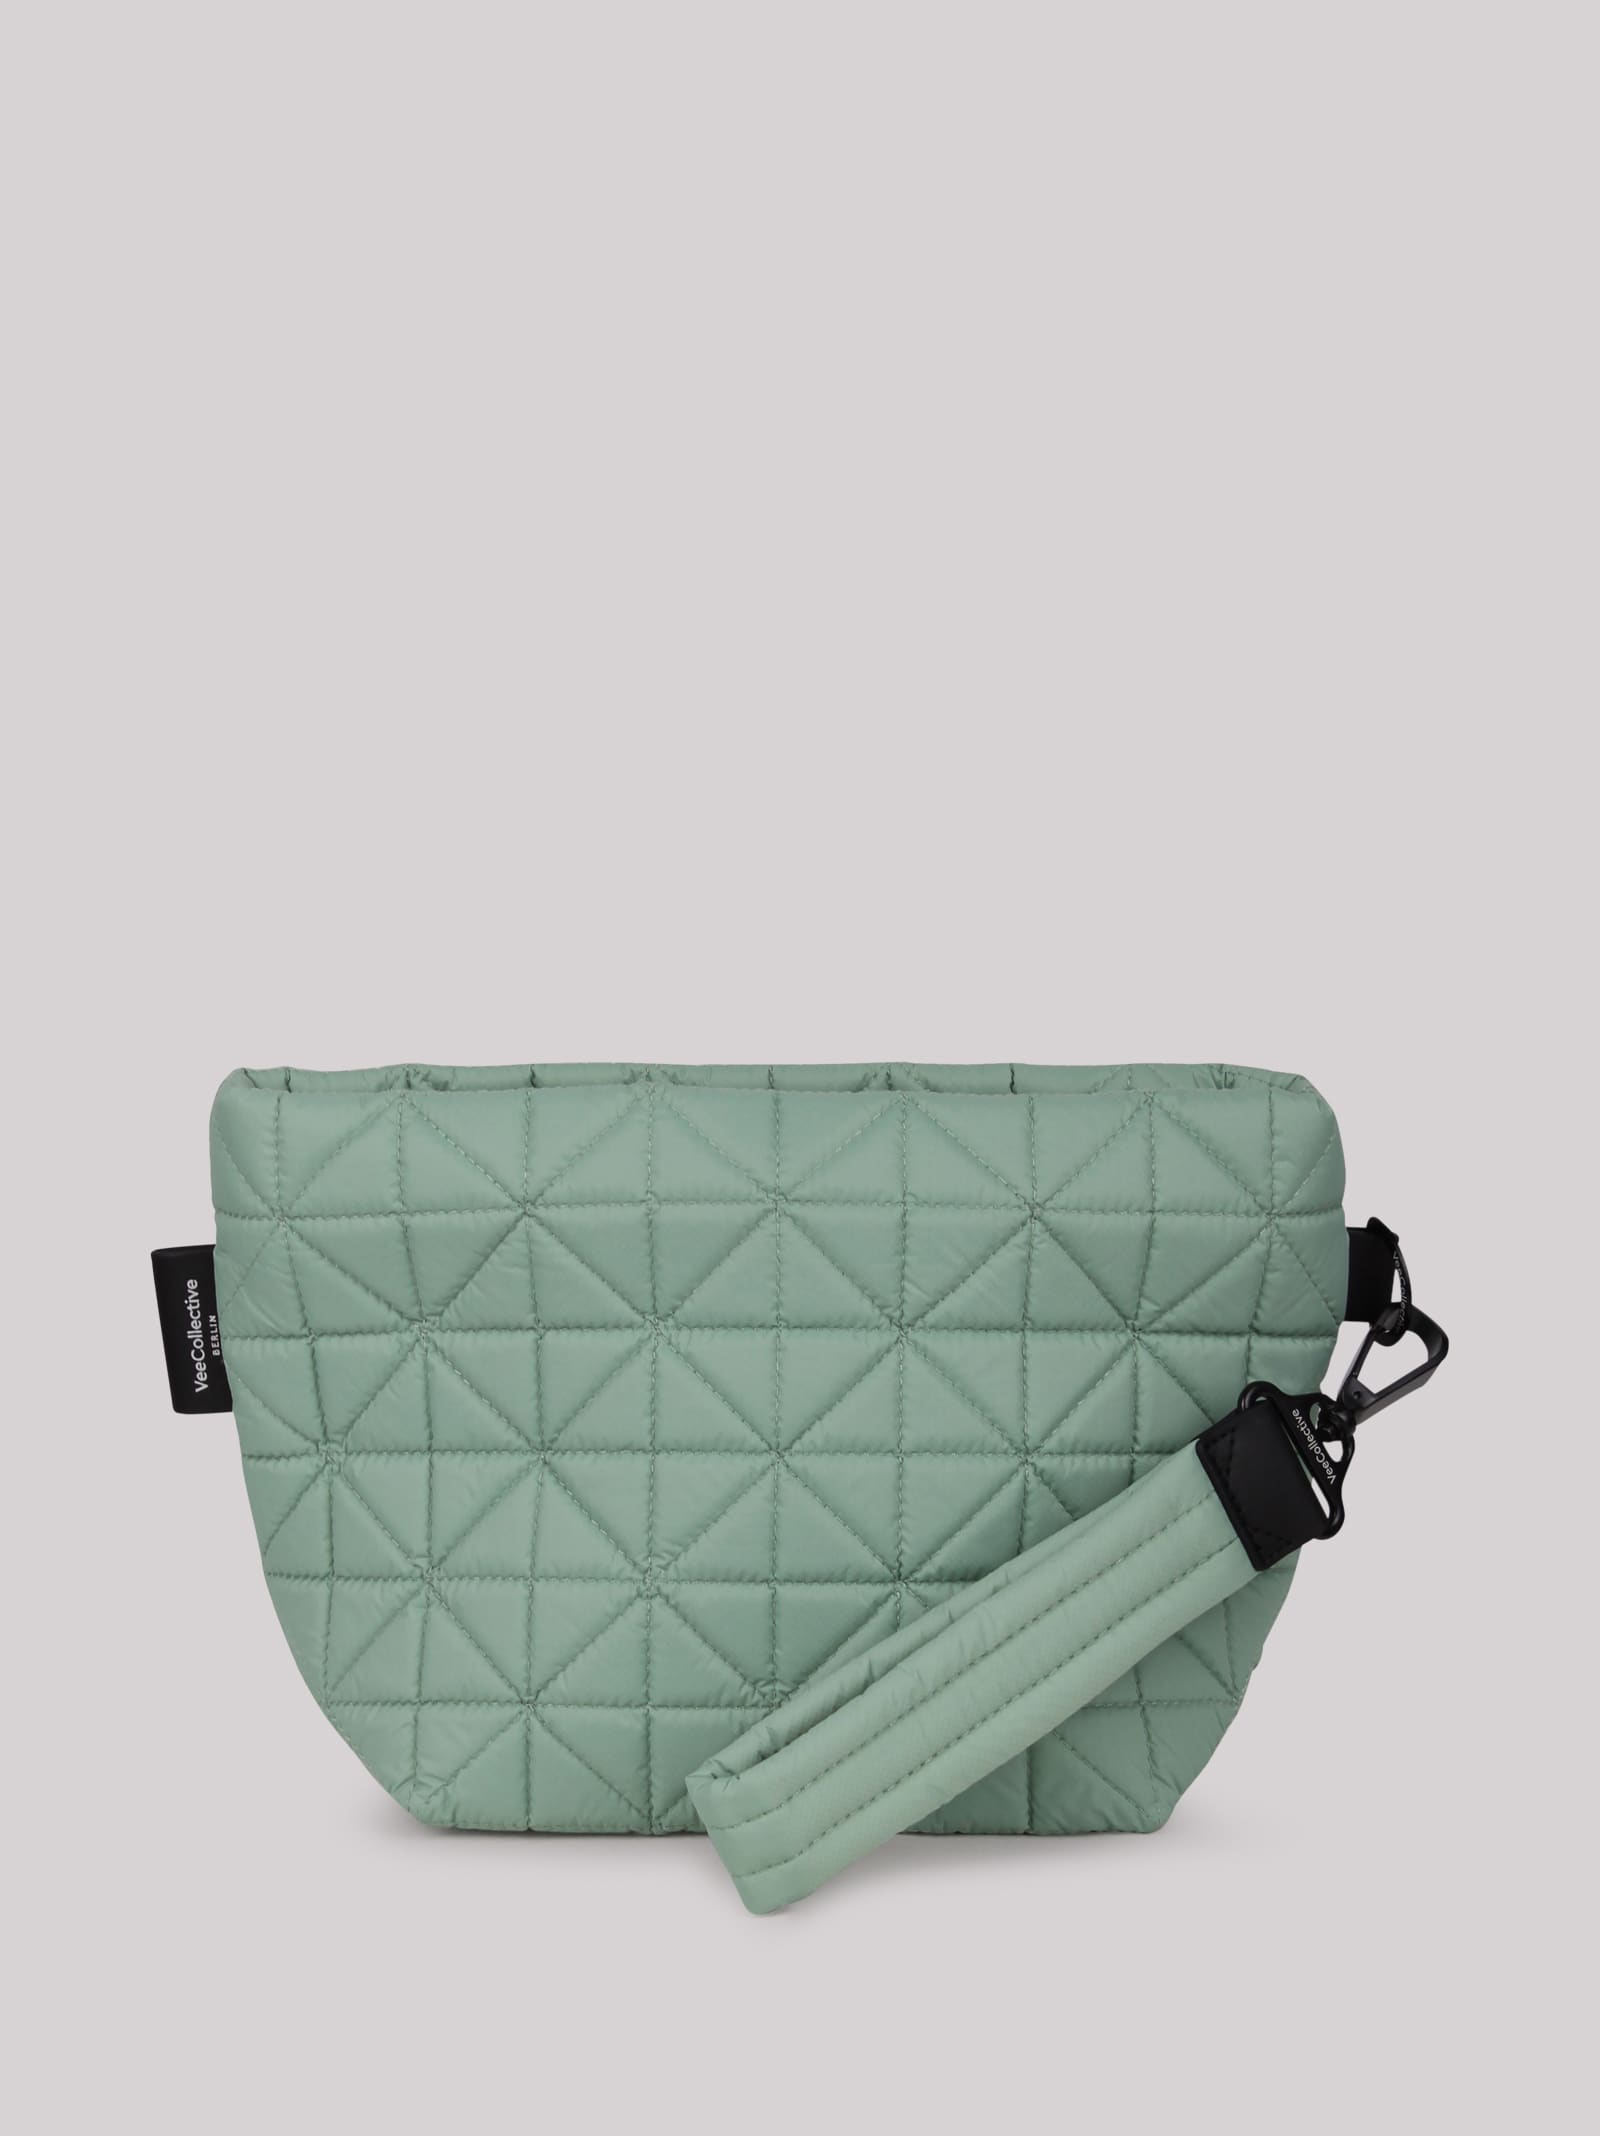 VEECOLLECTIVE VEE COLLECTIVE PADDED CLUTCH